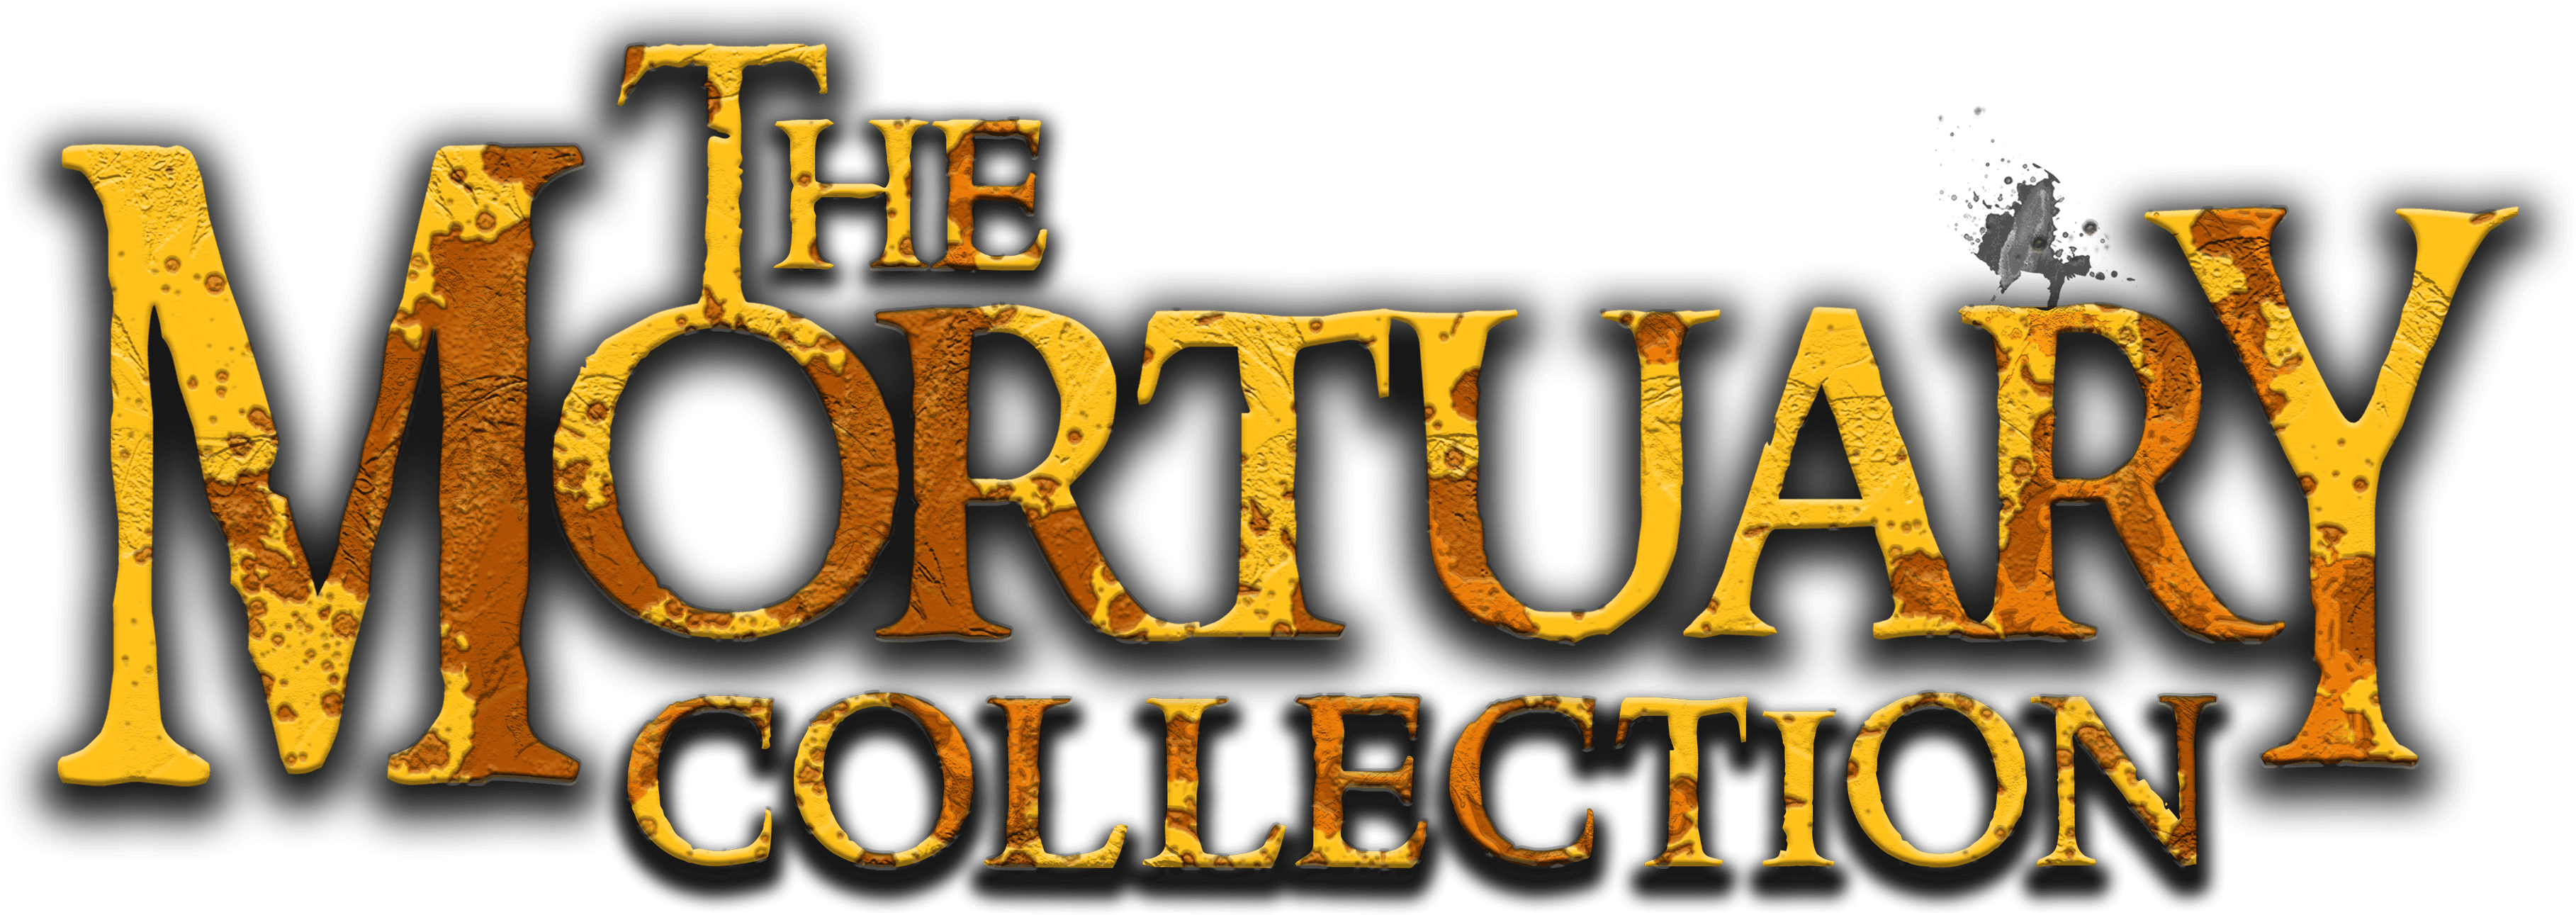 The Mortuary Collection logo